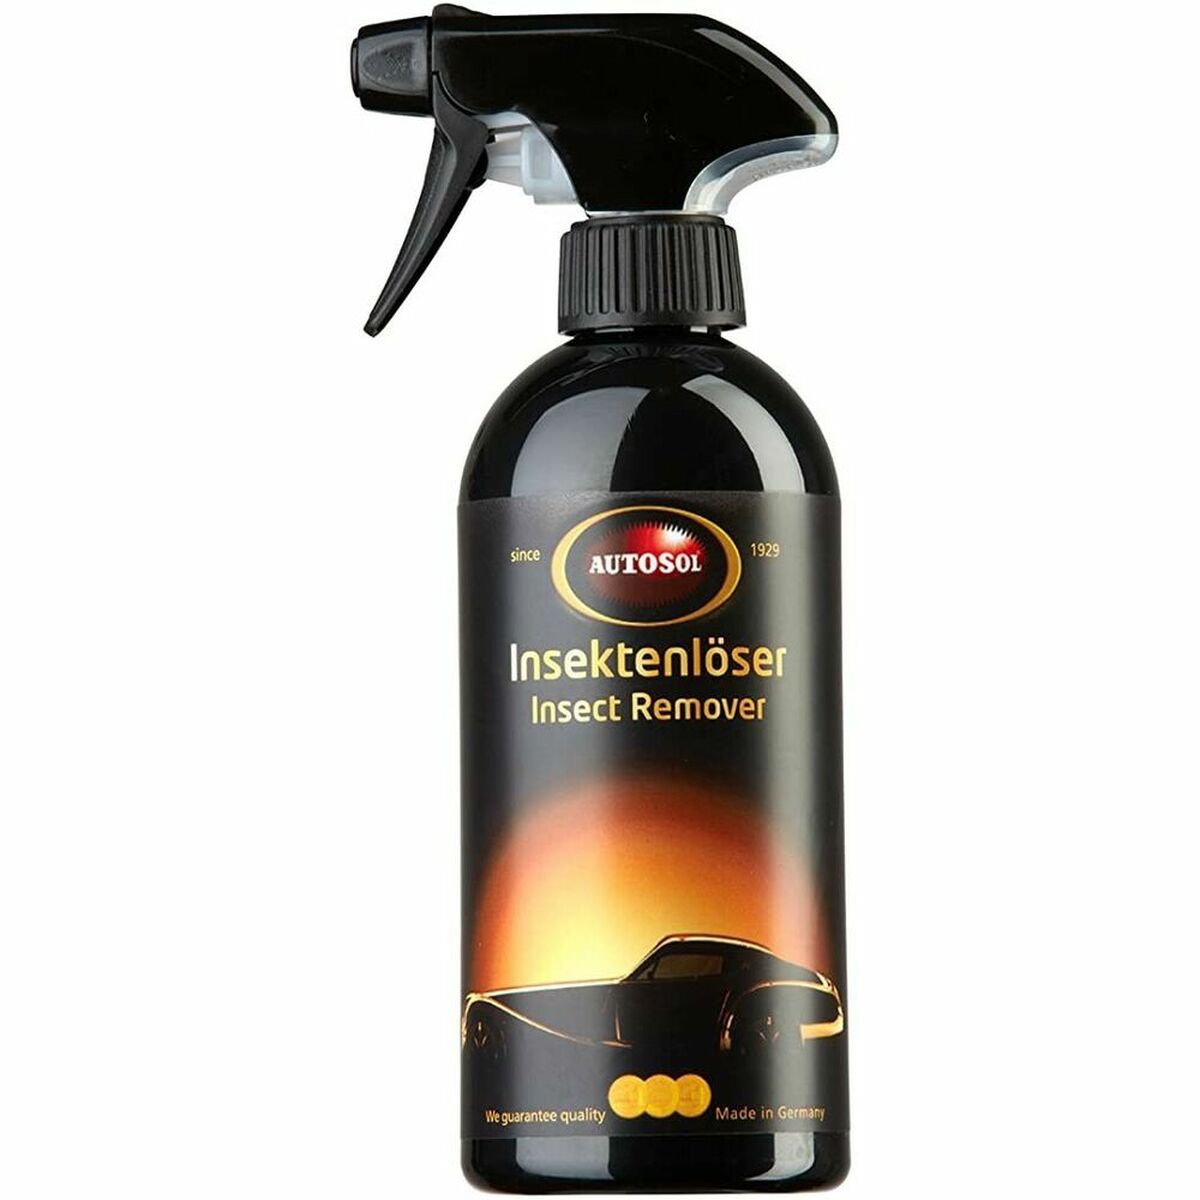 Cleaner Autosol 11 005190 500 ml Insect repellant